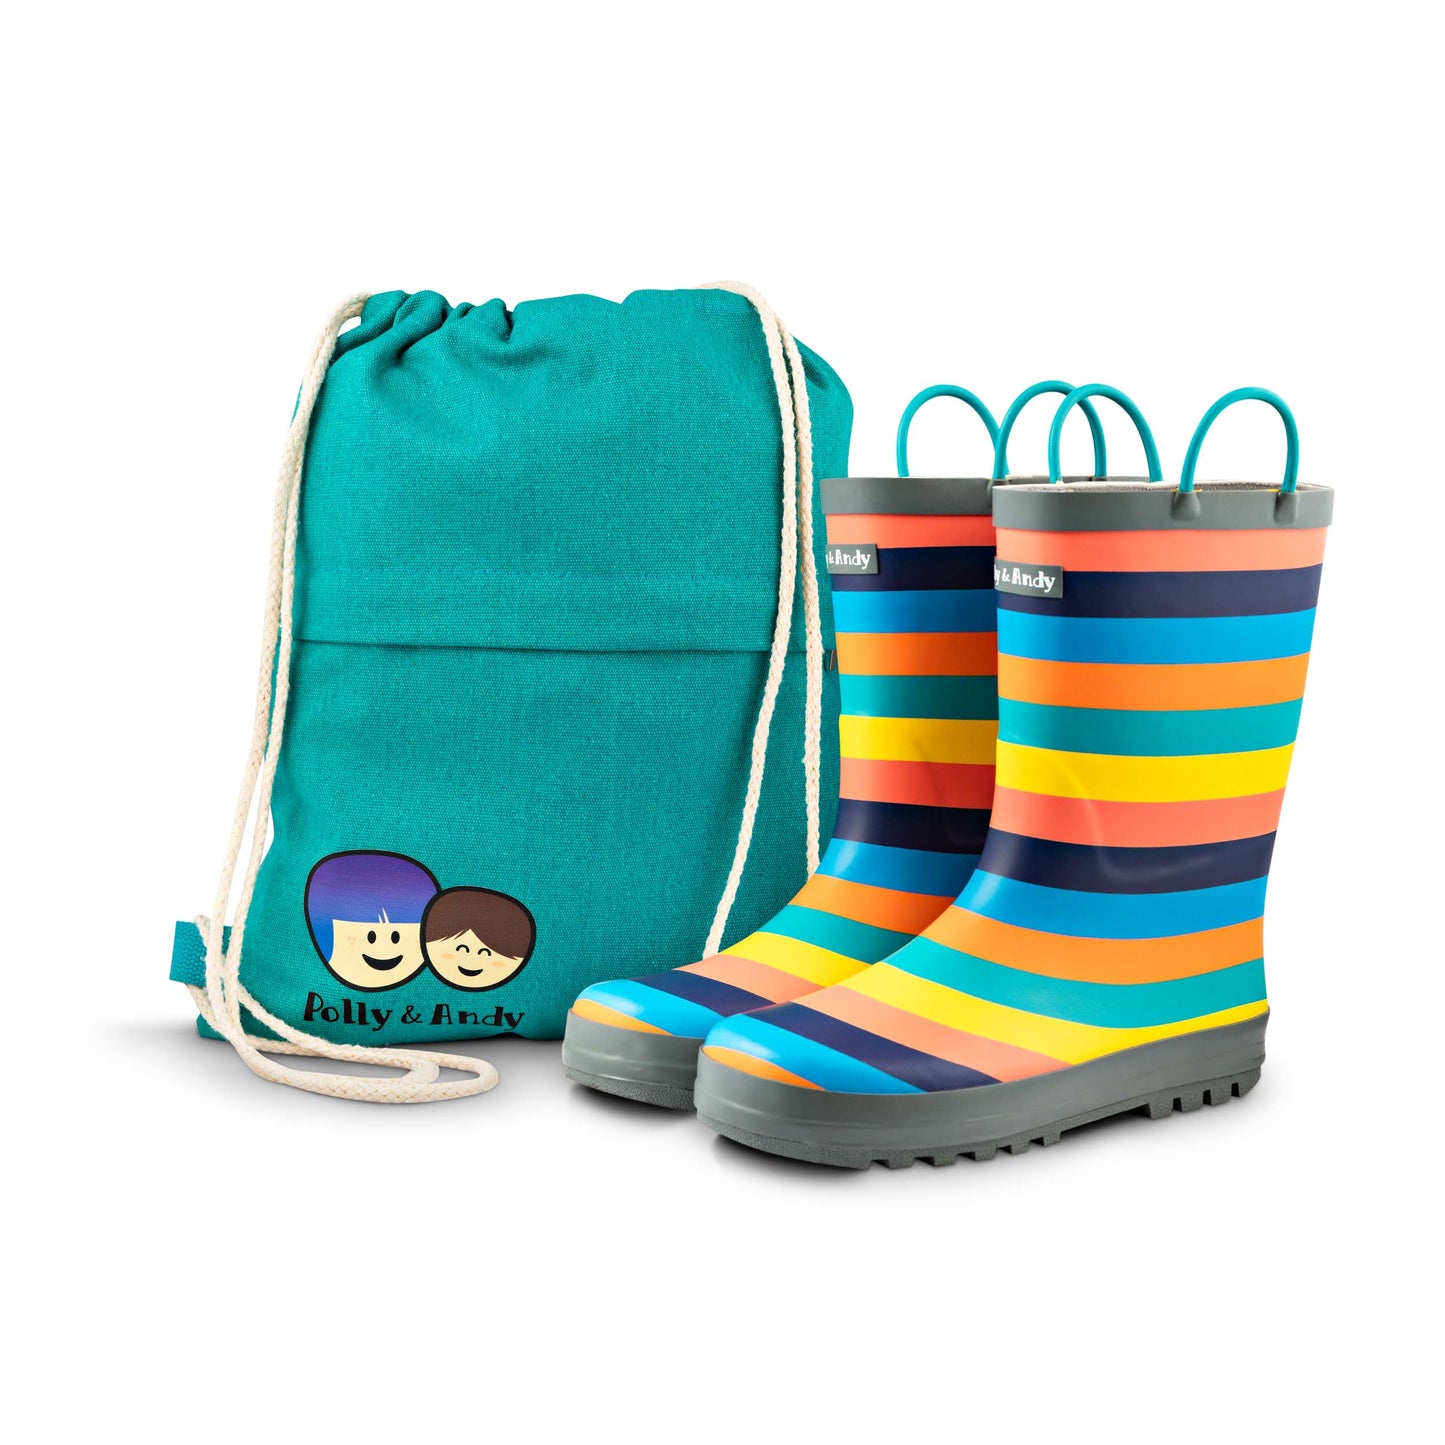 APRIL LAUNCH OFFER! Order your Sustainable Rainboots which Includes FREE shipping AND a free pair of rainbow knee high bamboo socks